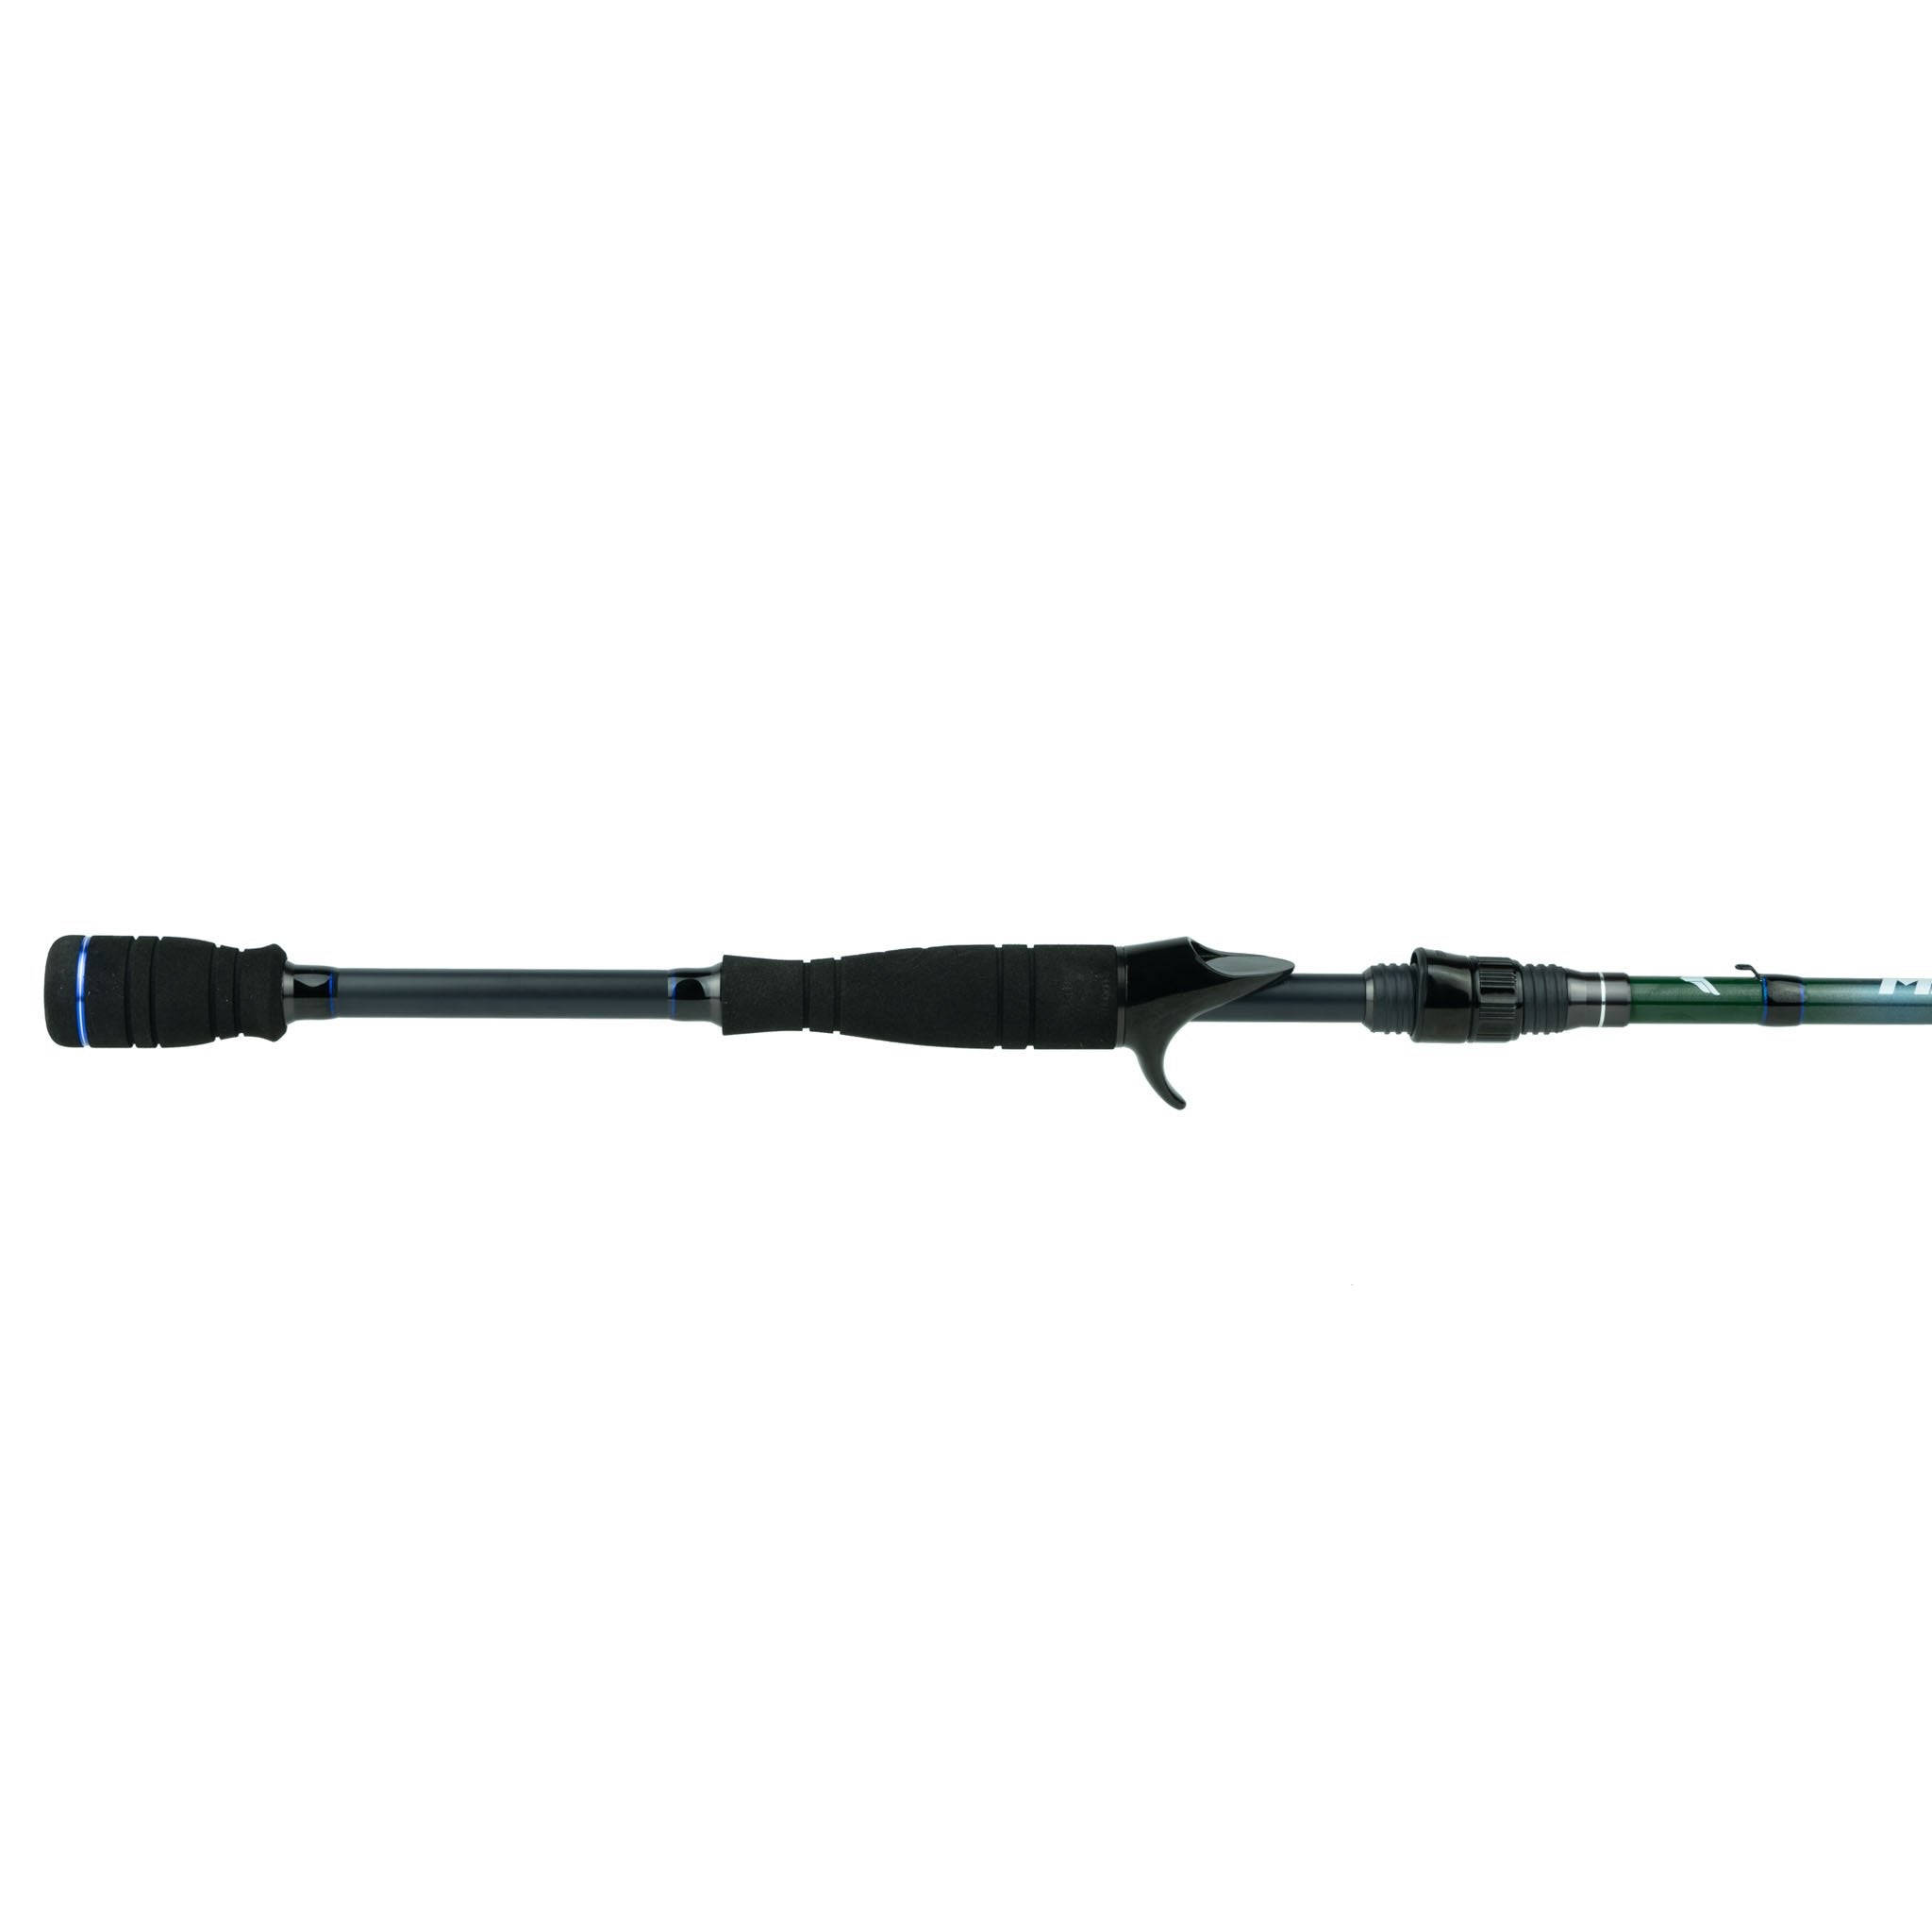 Restocking soon The 6th Sense Fishing Milliken Series Swimbait Rod is  restocking soon at Blue Water Gear. Be sure to not miss out an